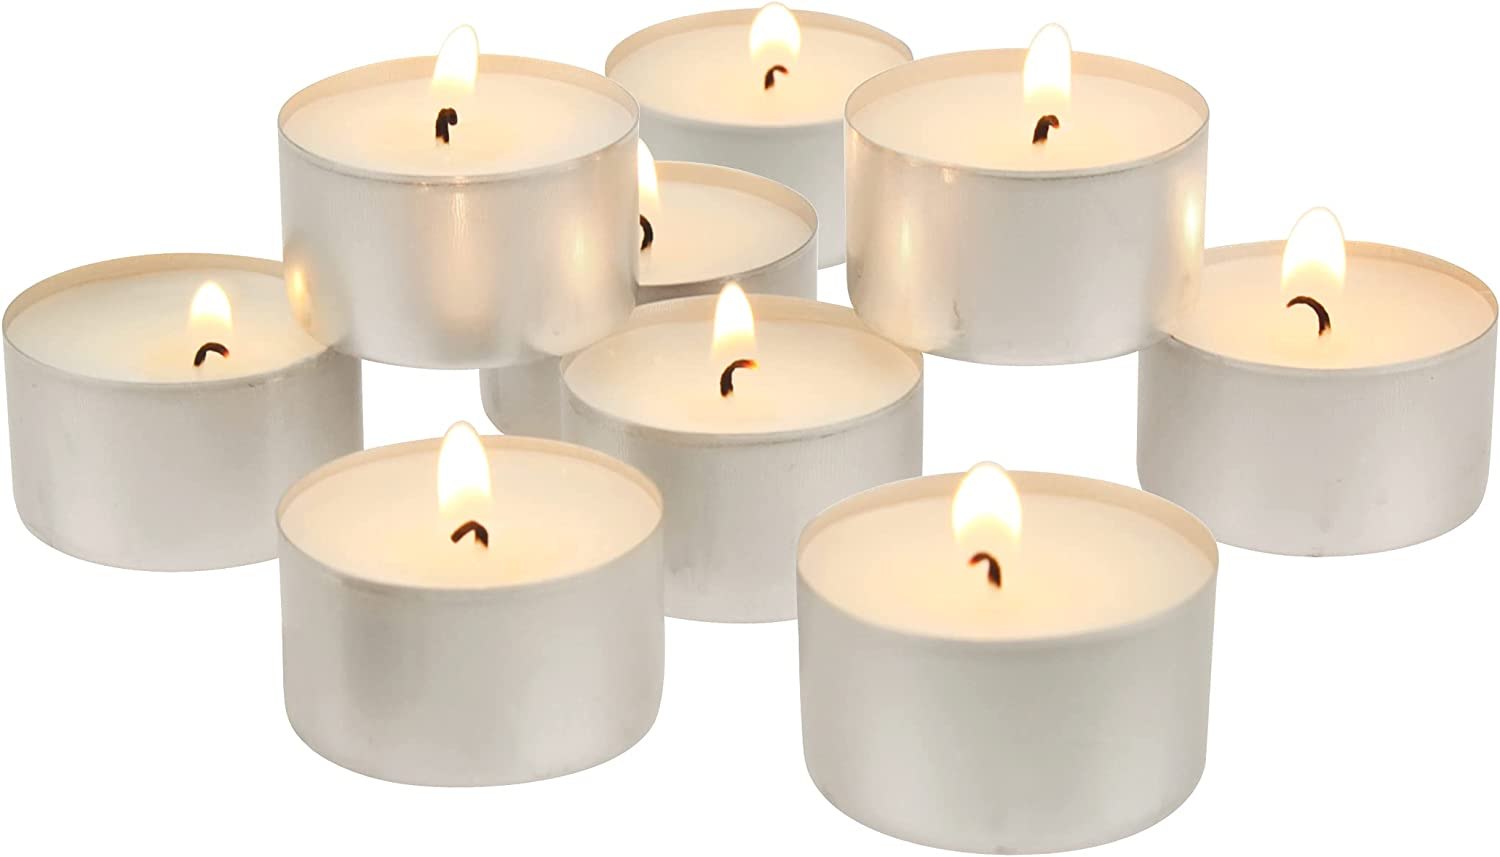 Tea Light Candles - 100 Bulk Pack - White Unscented, Travel Size , 4 Hour